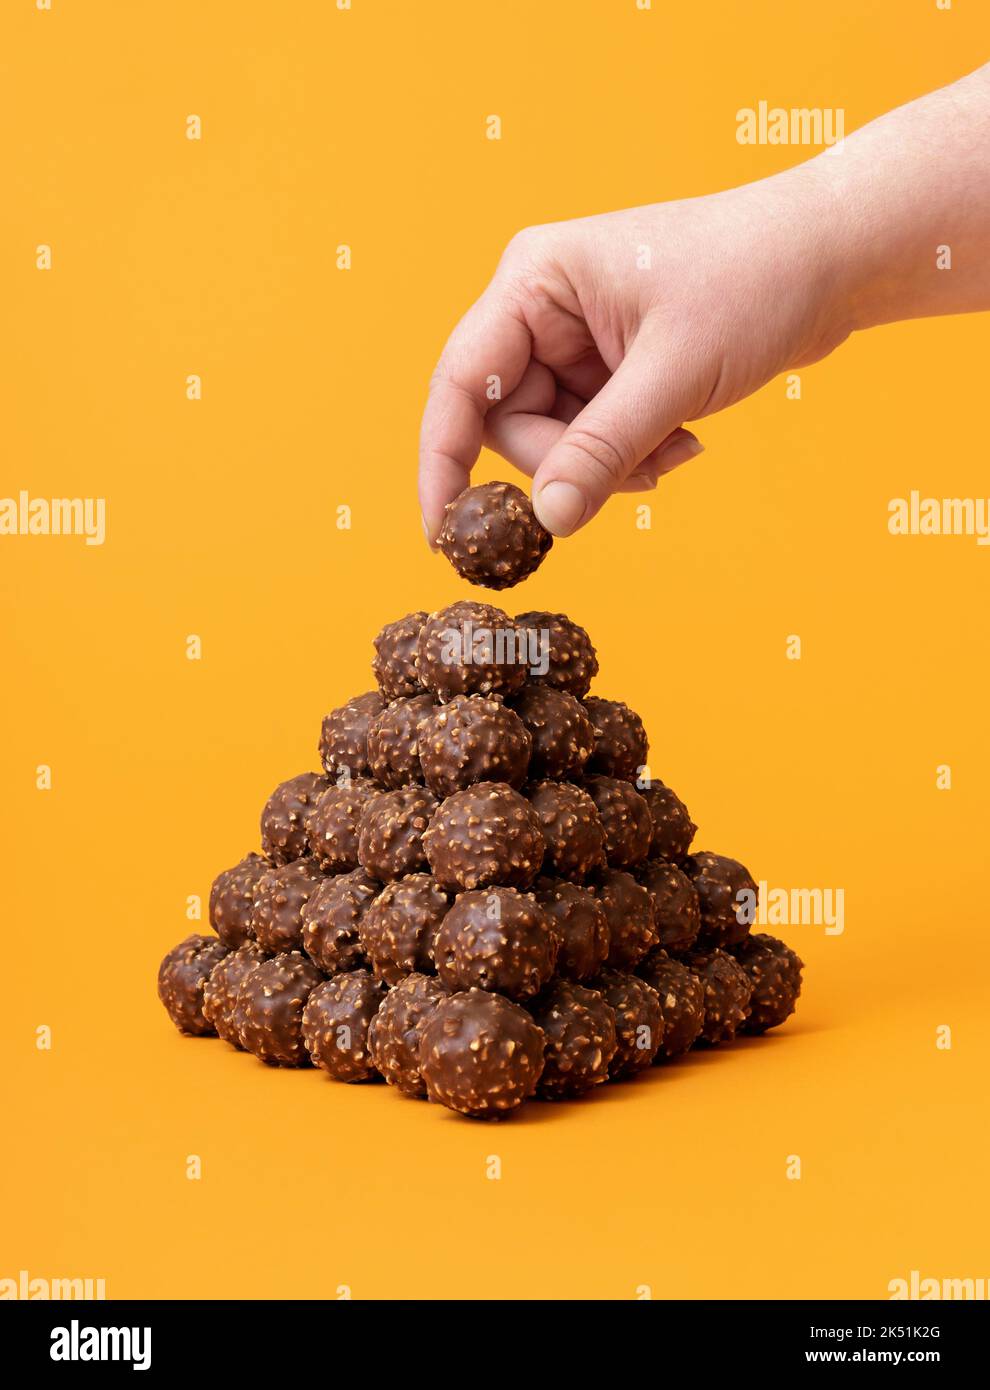 Woman's hand taking a chocolate truffle from a big pile. Chocolate candies tower on a vibrant orange background. Stock Photo